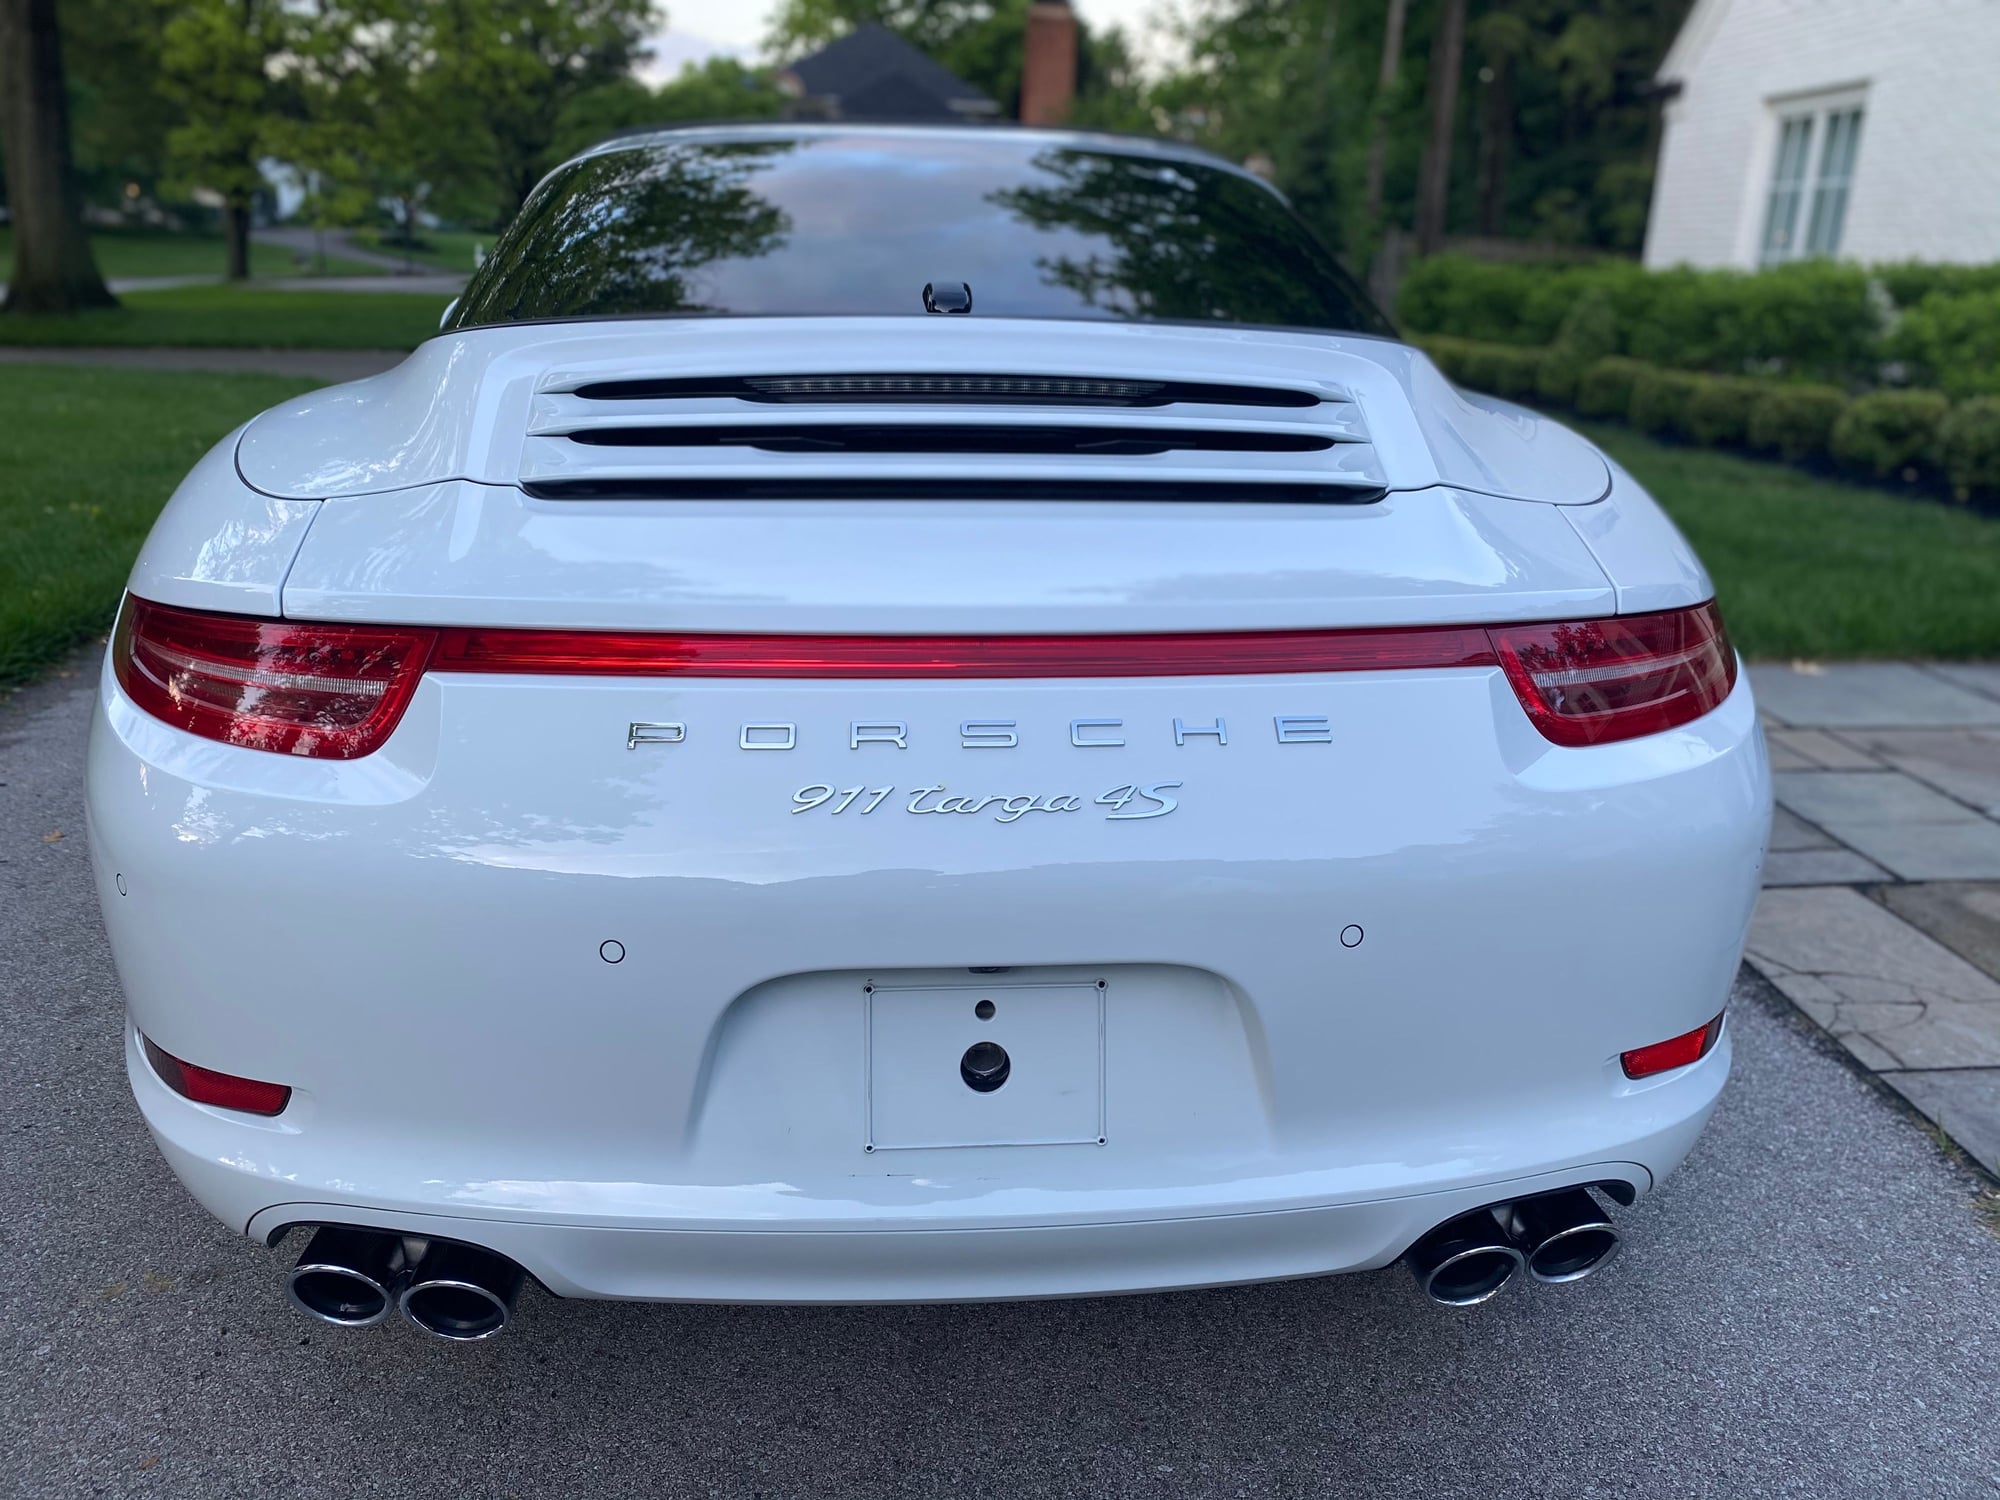 2016 Porsche 911 - 2016 Porsche Targa - Used - VIN WP0BB2A94GS136416 - 8,800 Miles - Other - AWD - Automatic - Convertible - White - Indianapolis, IN 46260, United States